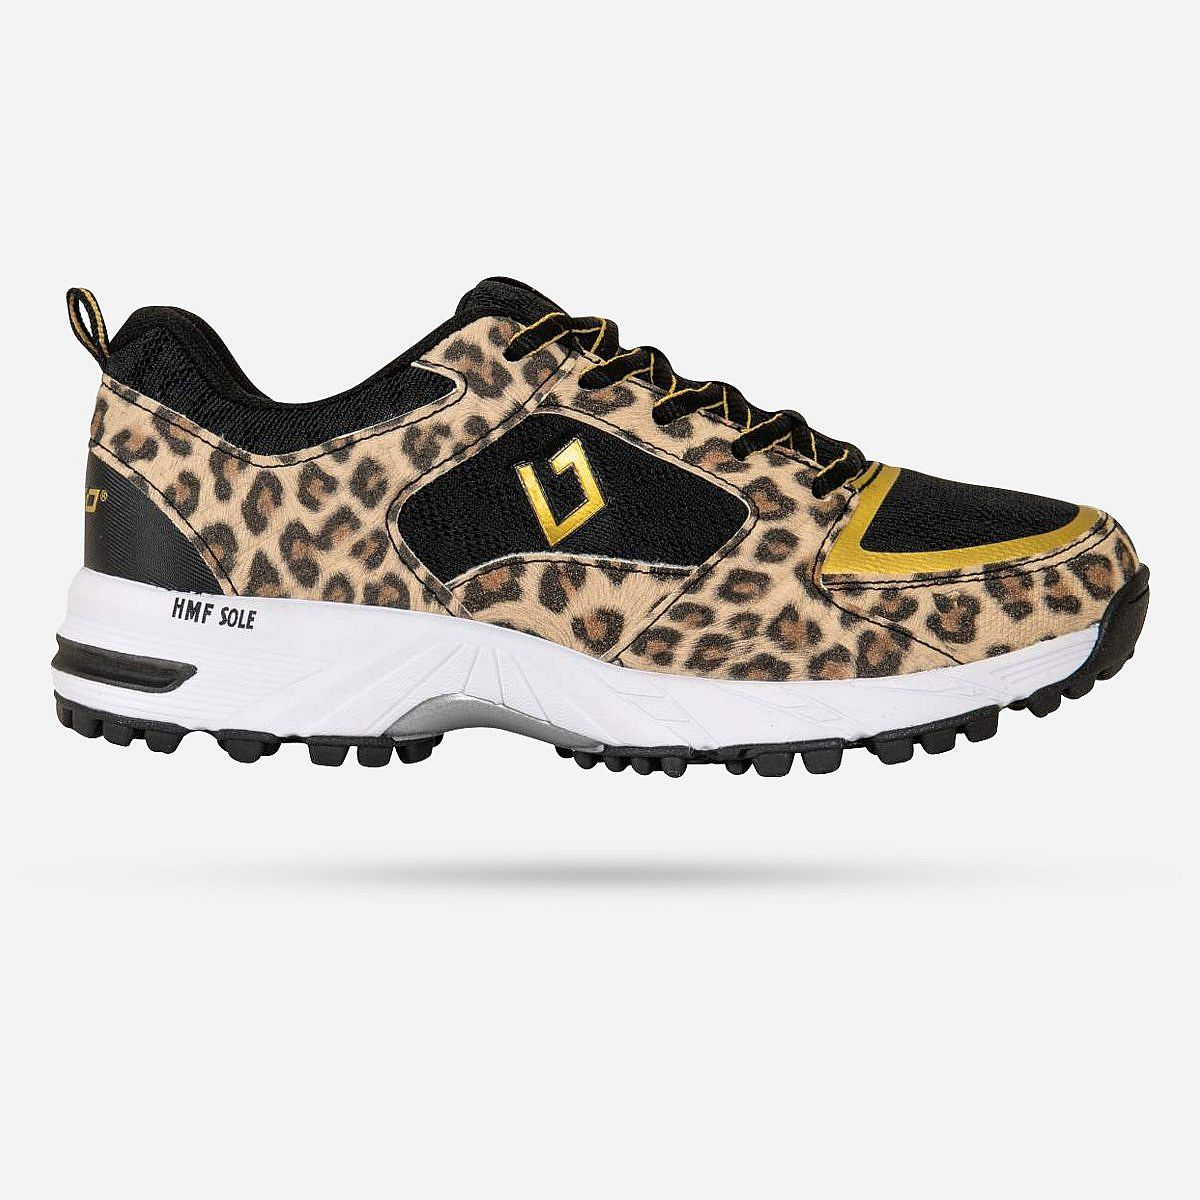 AN273144 Bf1031h Brabo Shoes Tribute Leopard